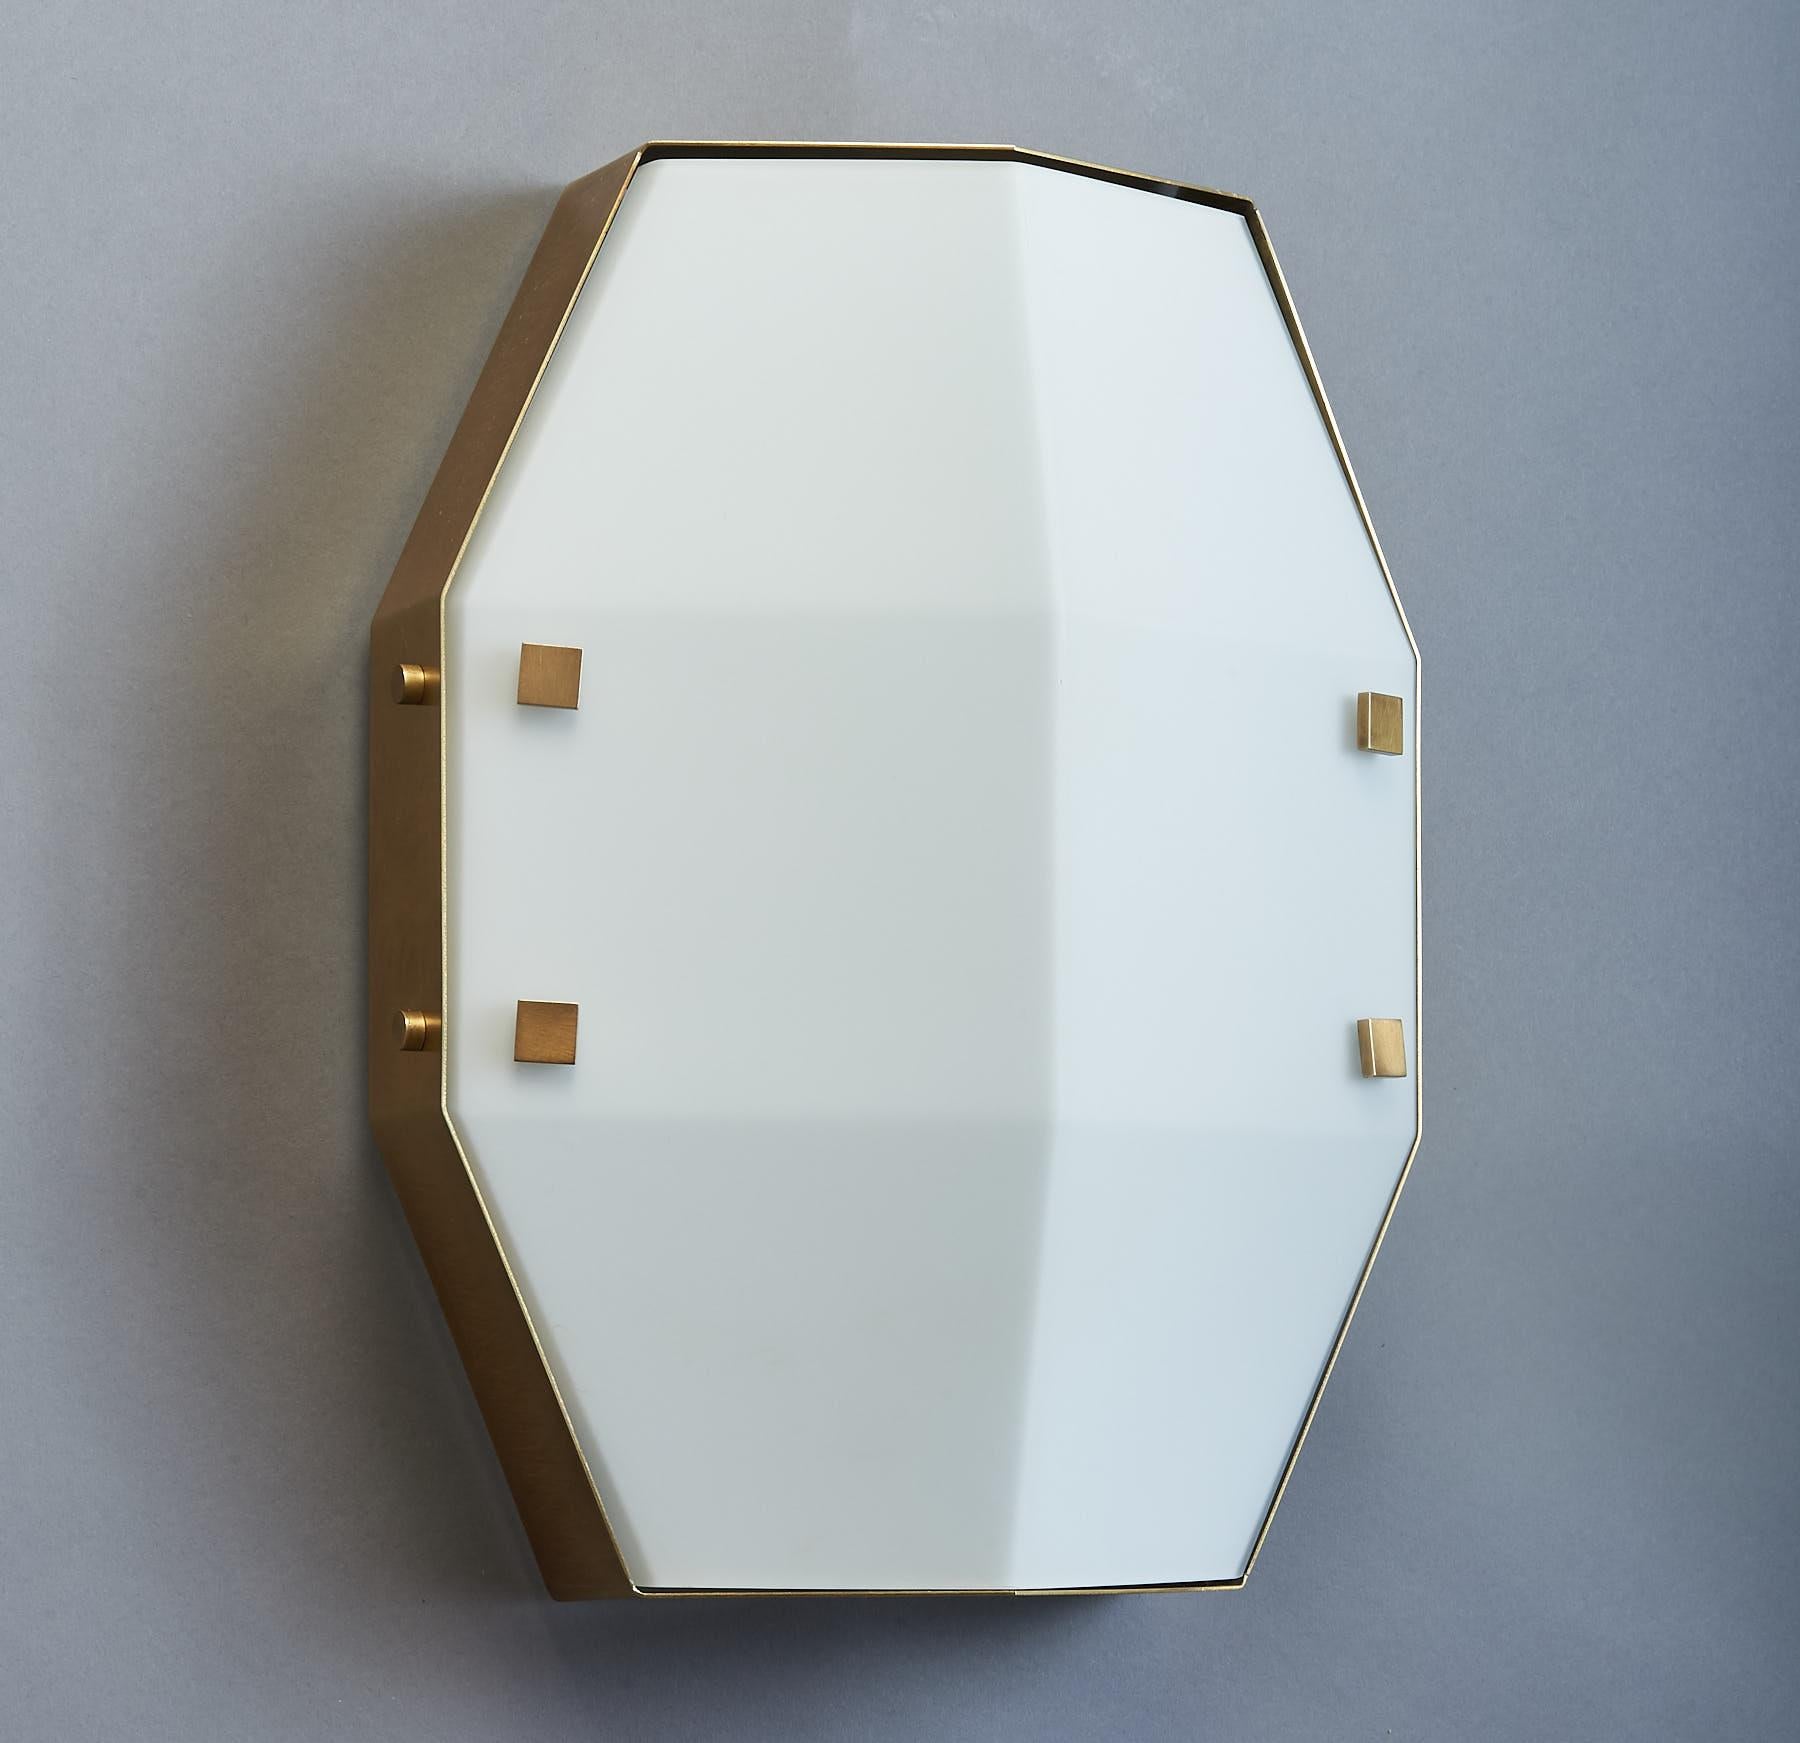 ARREDOLUCE
Pair of wall sconces, satin finish brass with angled and shaped satin opaline glass shades.
Can also be mounted as flush mount ceiling lights. Italy 1960s
Sold and priced by the pair.
Dimensions: 14 W x 11 D x 5 H
Rewired for use in the